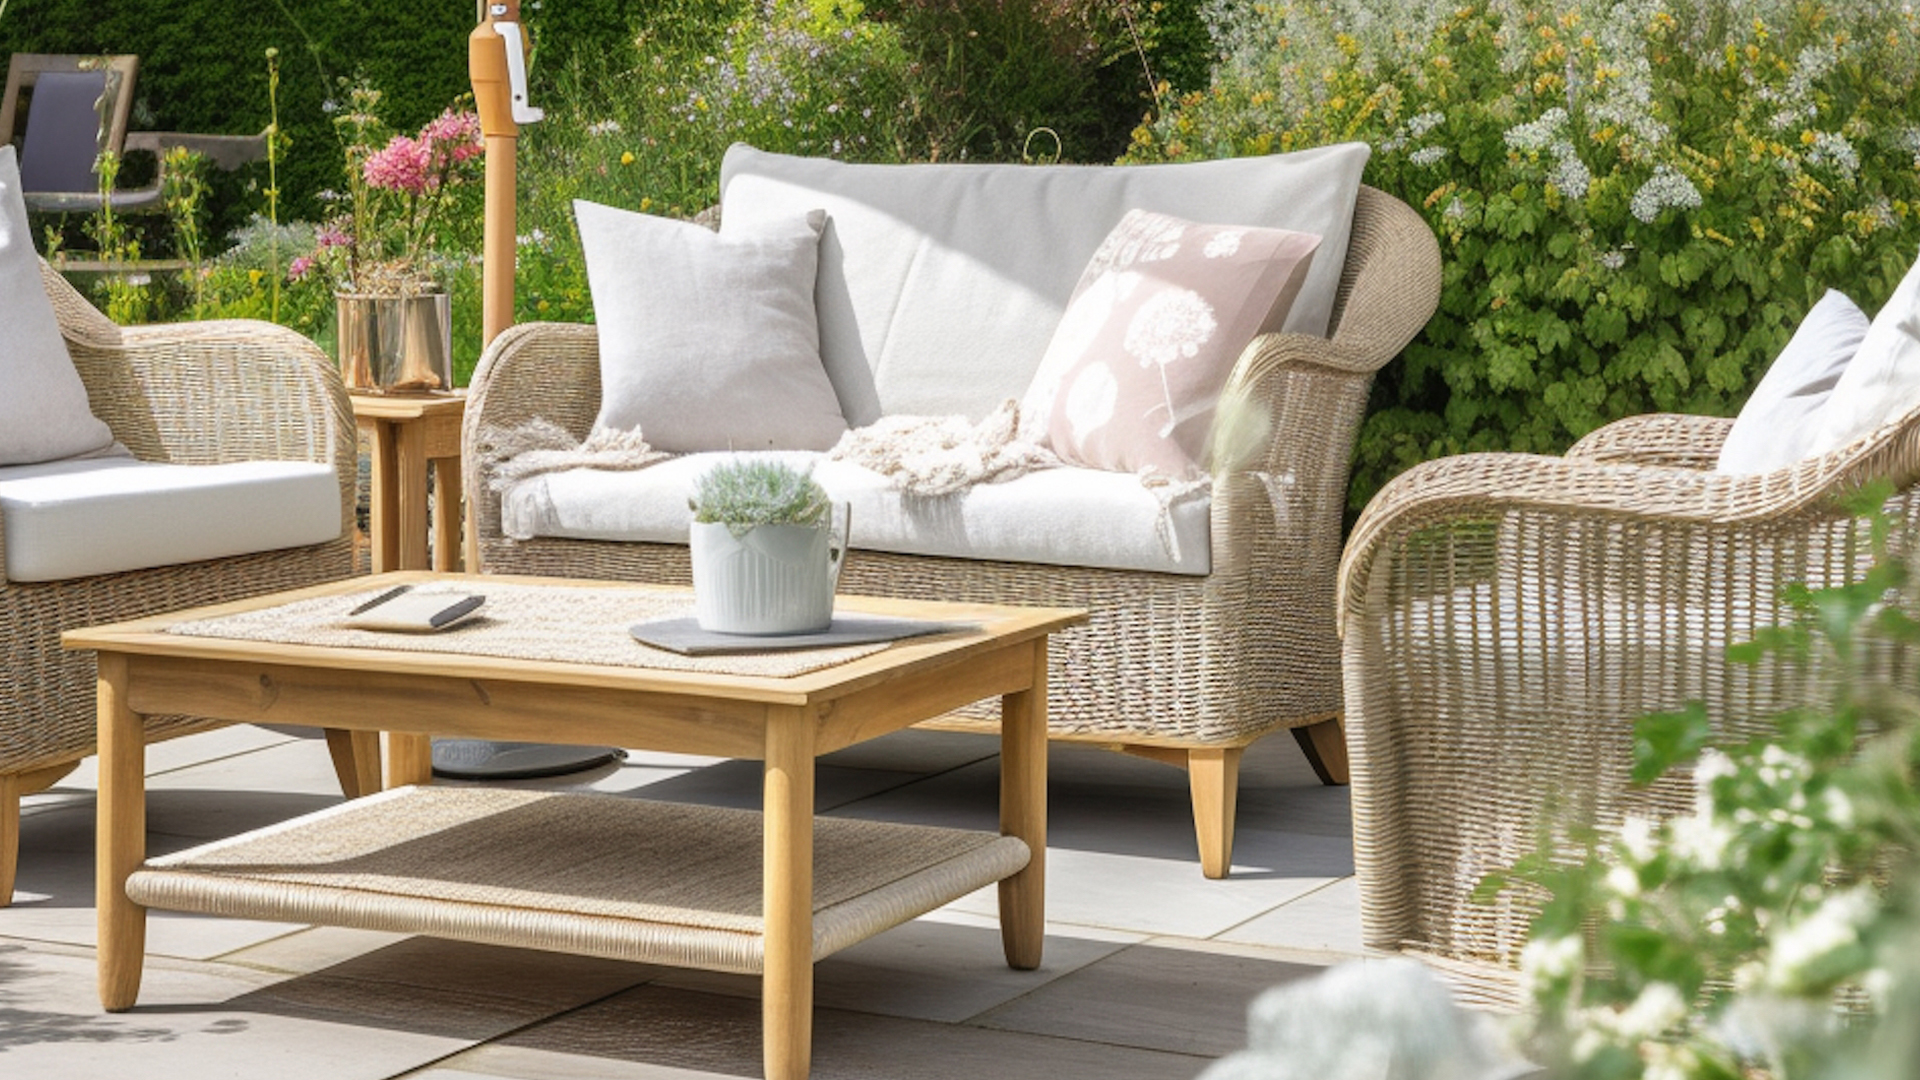 Transform Your Patio with a Budget-Friendly Backyard DIY for a Rustic & Bright Exterior Makeover!